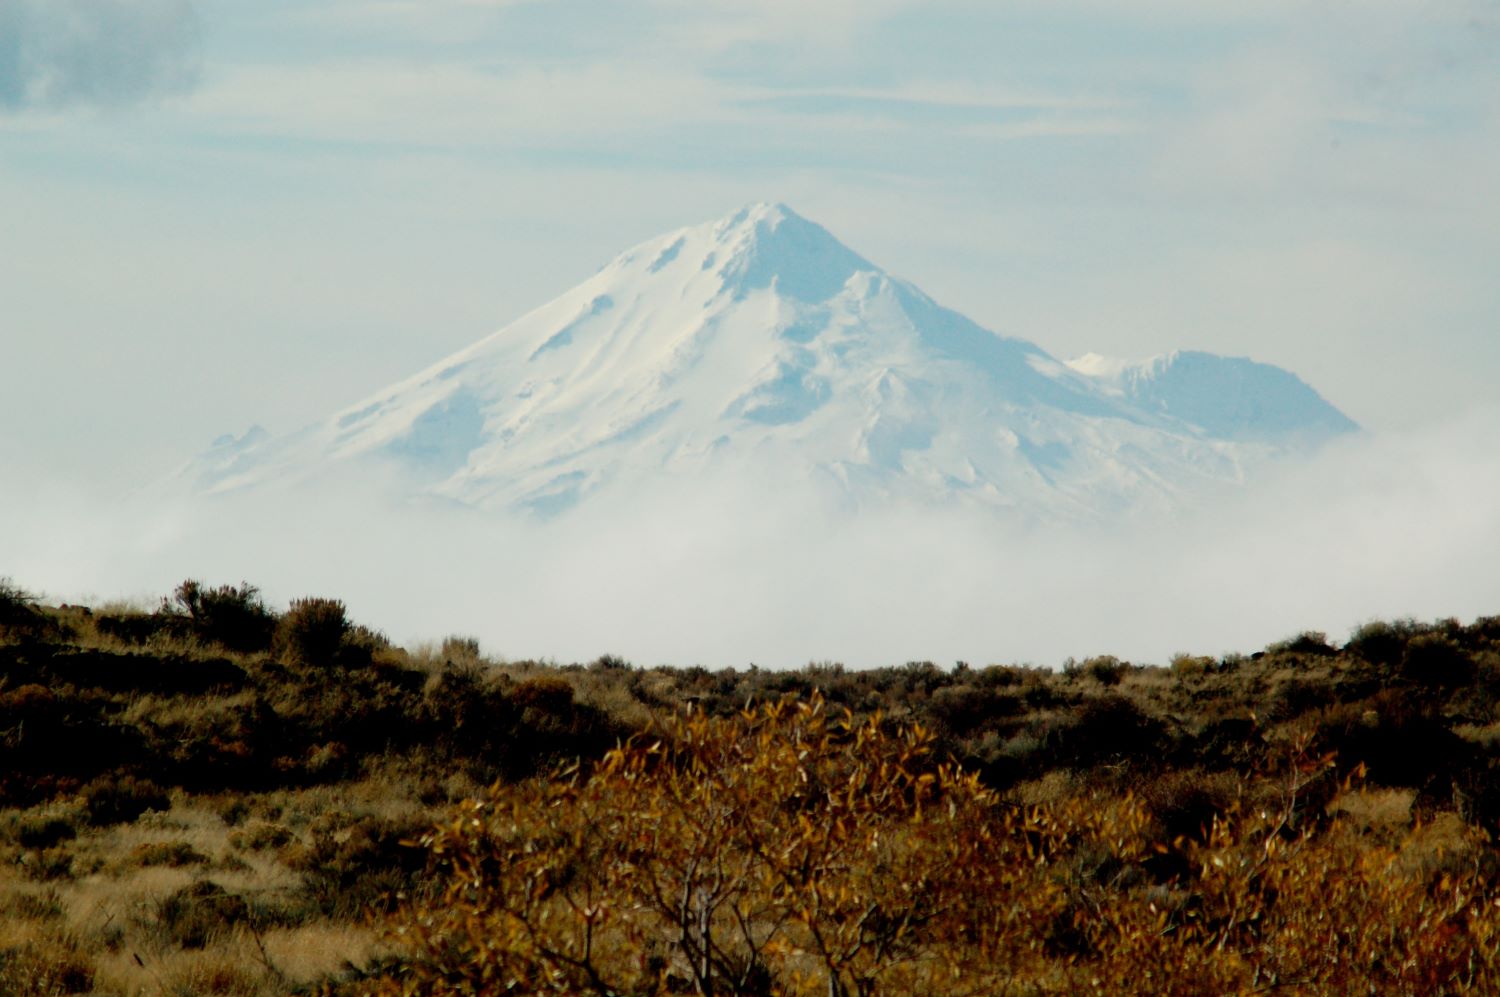 Mount Shasta from Lava Beds National Monument in California